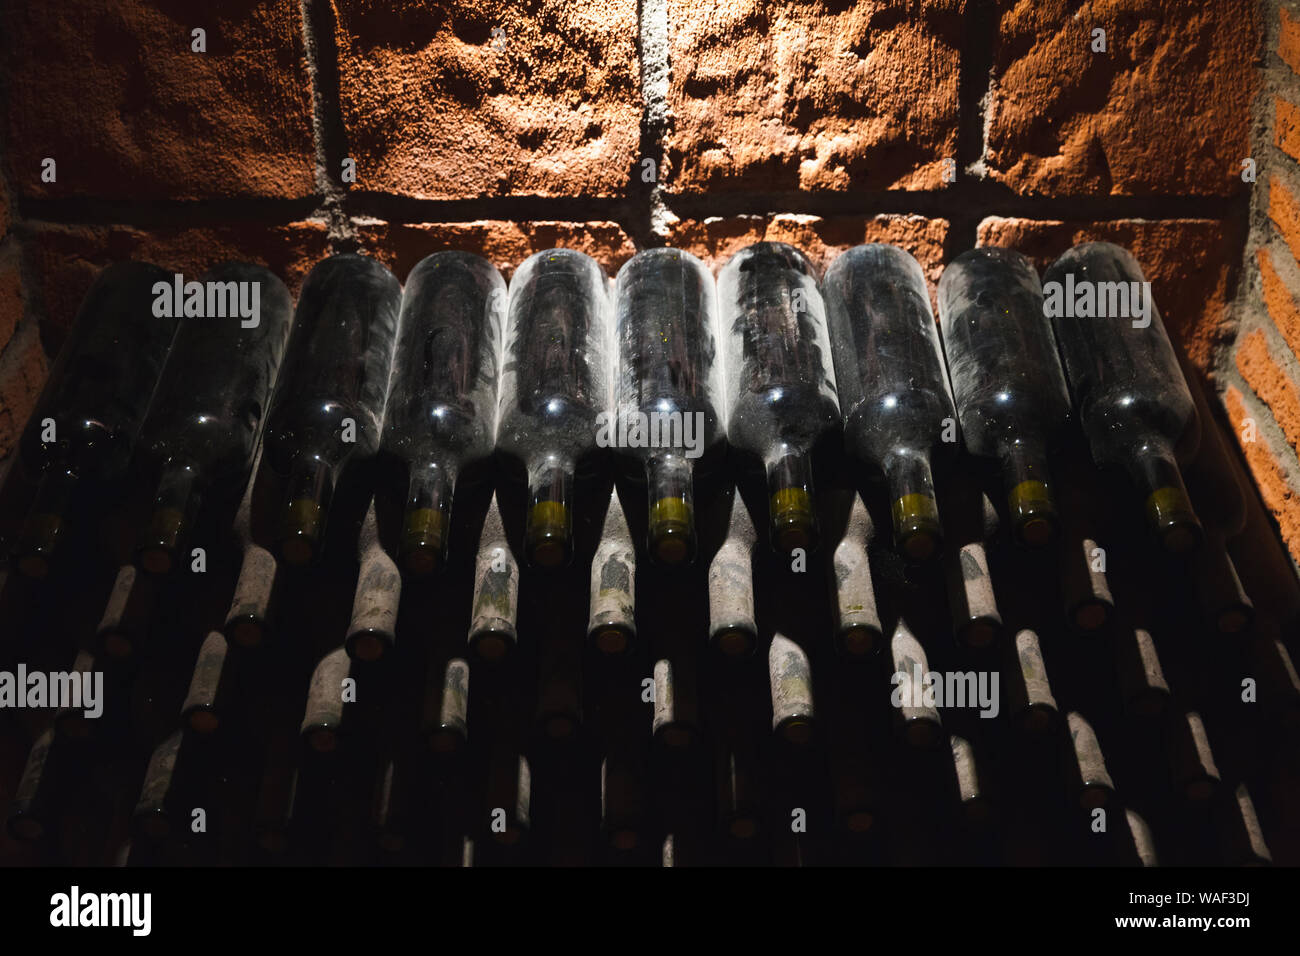 Stacked dusty bottles of wine lay in a dark wine Vault Stock Photo